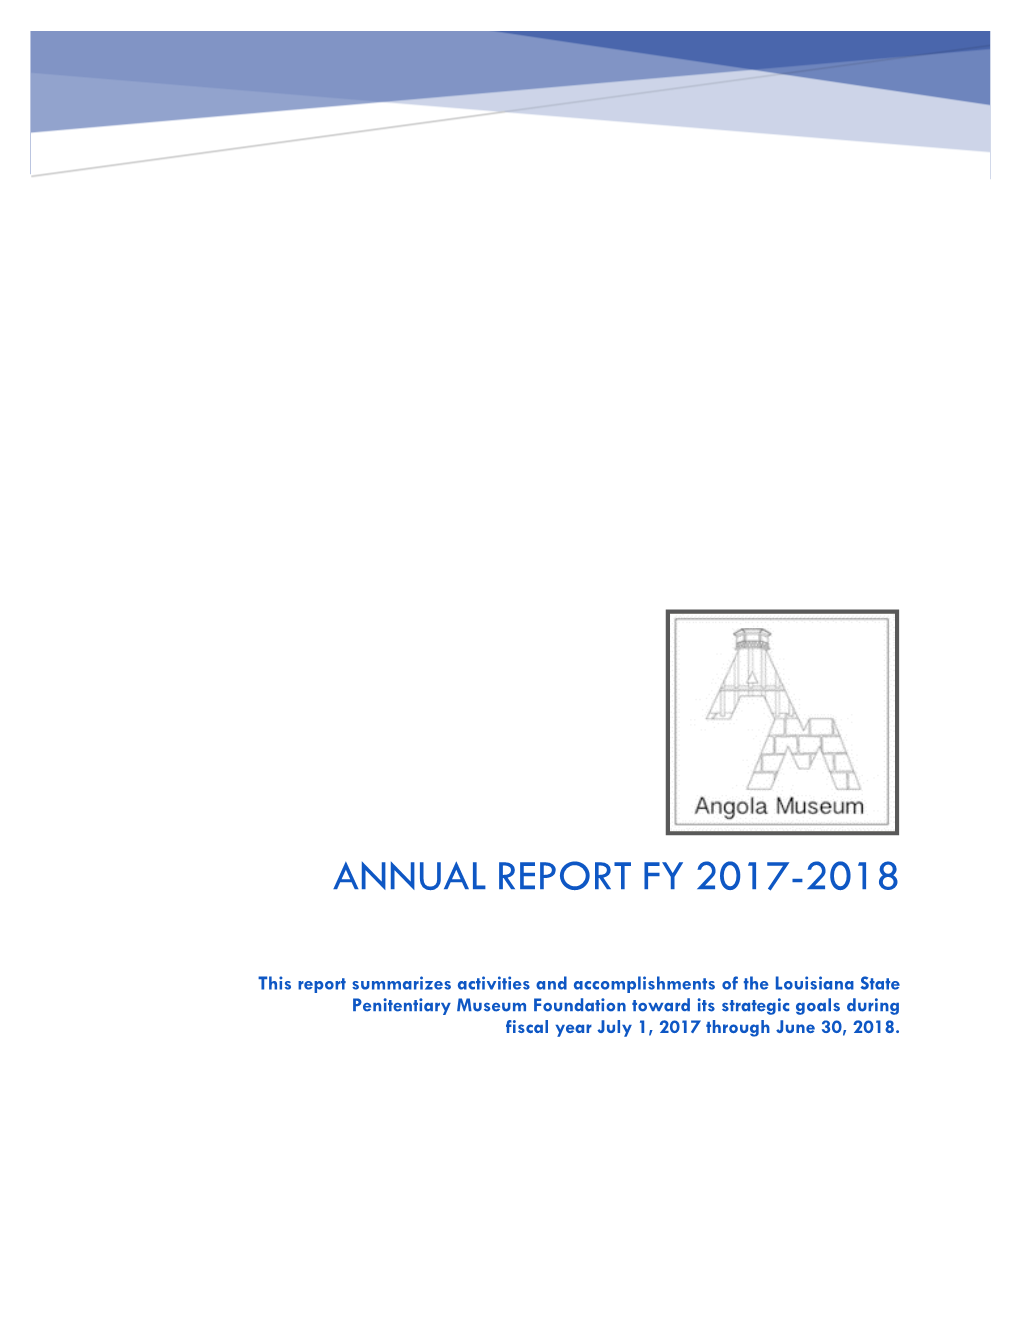 Annual Report Fy 2017-2018